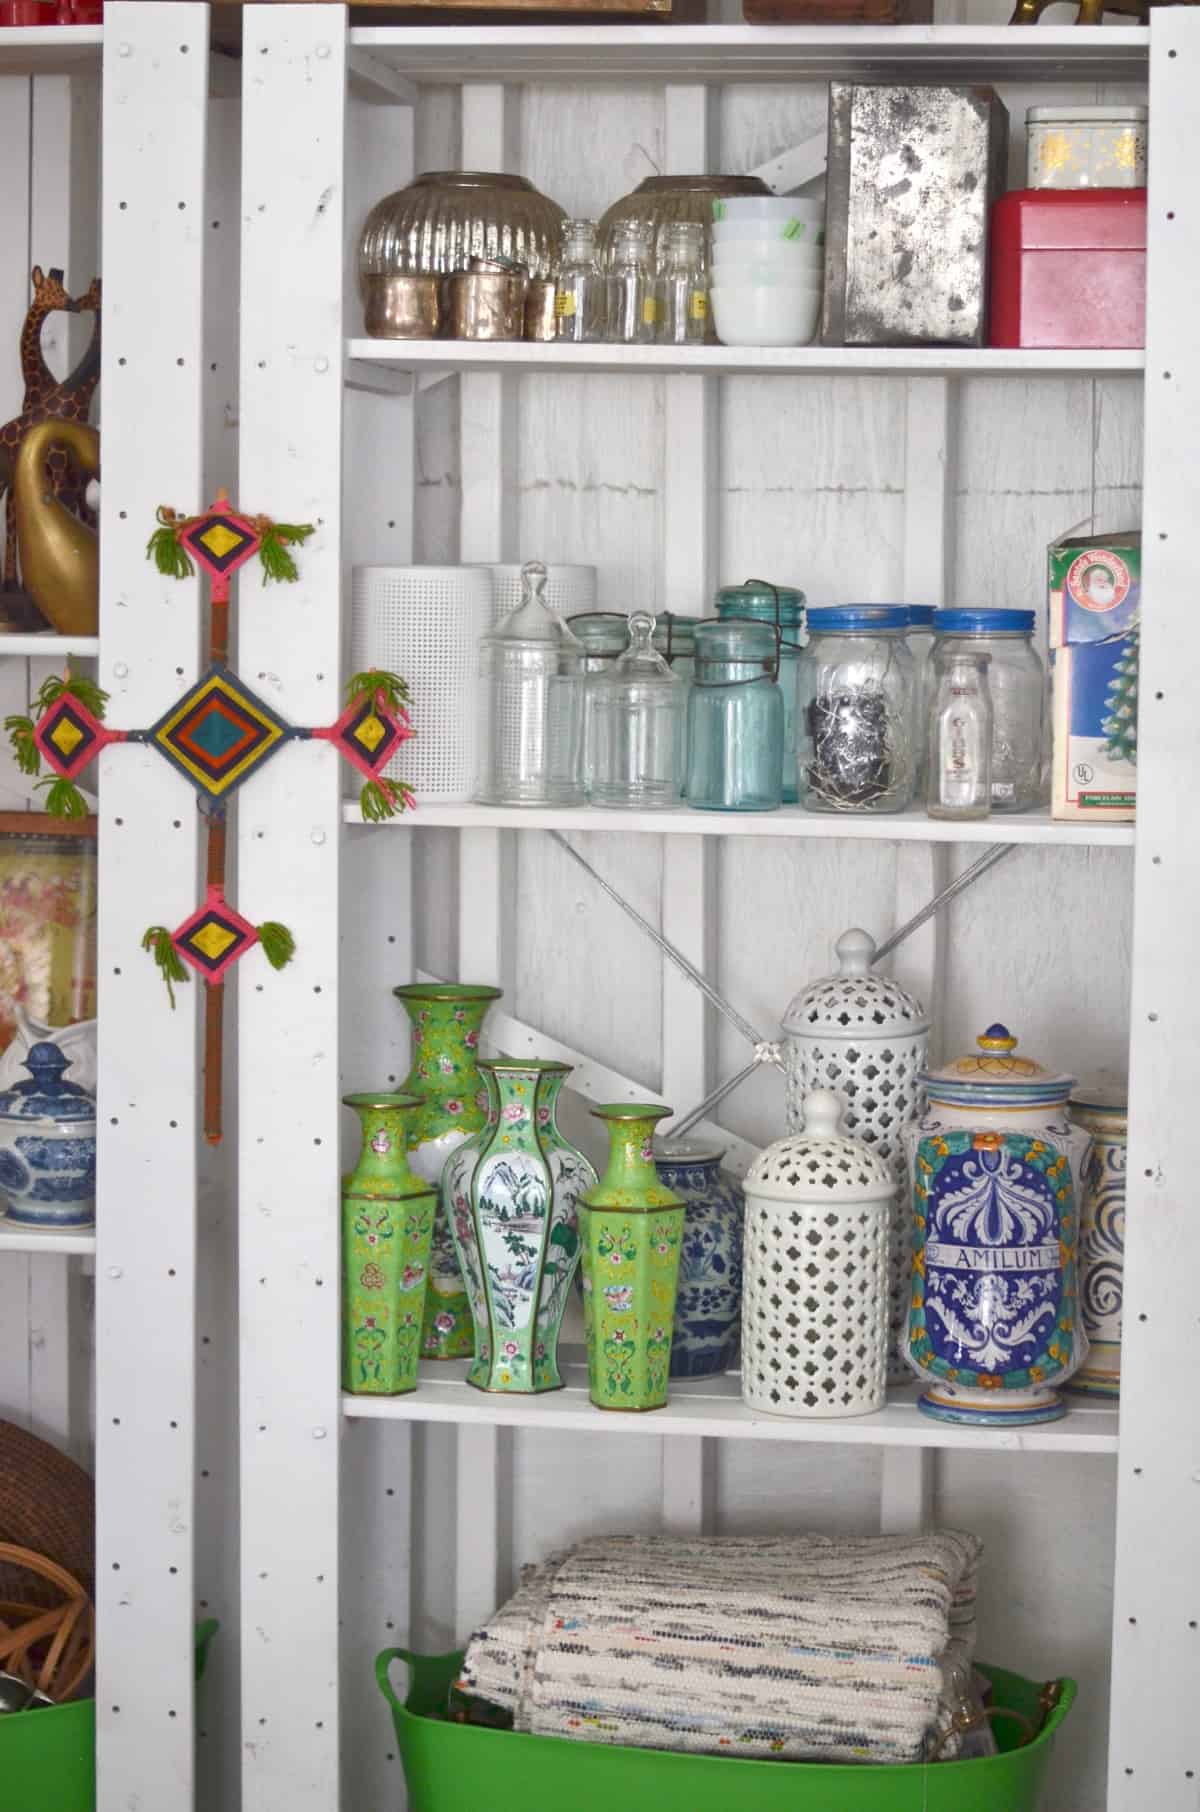 Backyard shed gets a colorful and eclectic multi-purpose makeover thanks to the One Room Challenge.